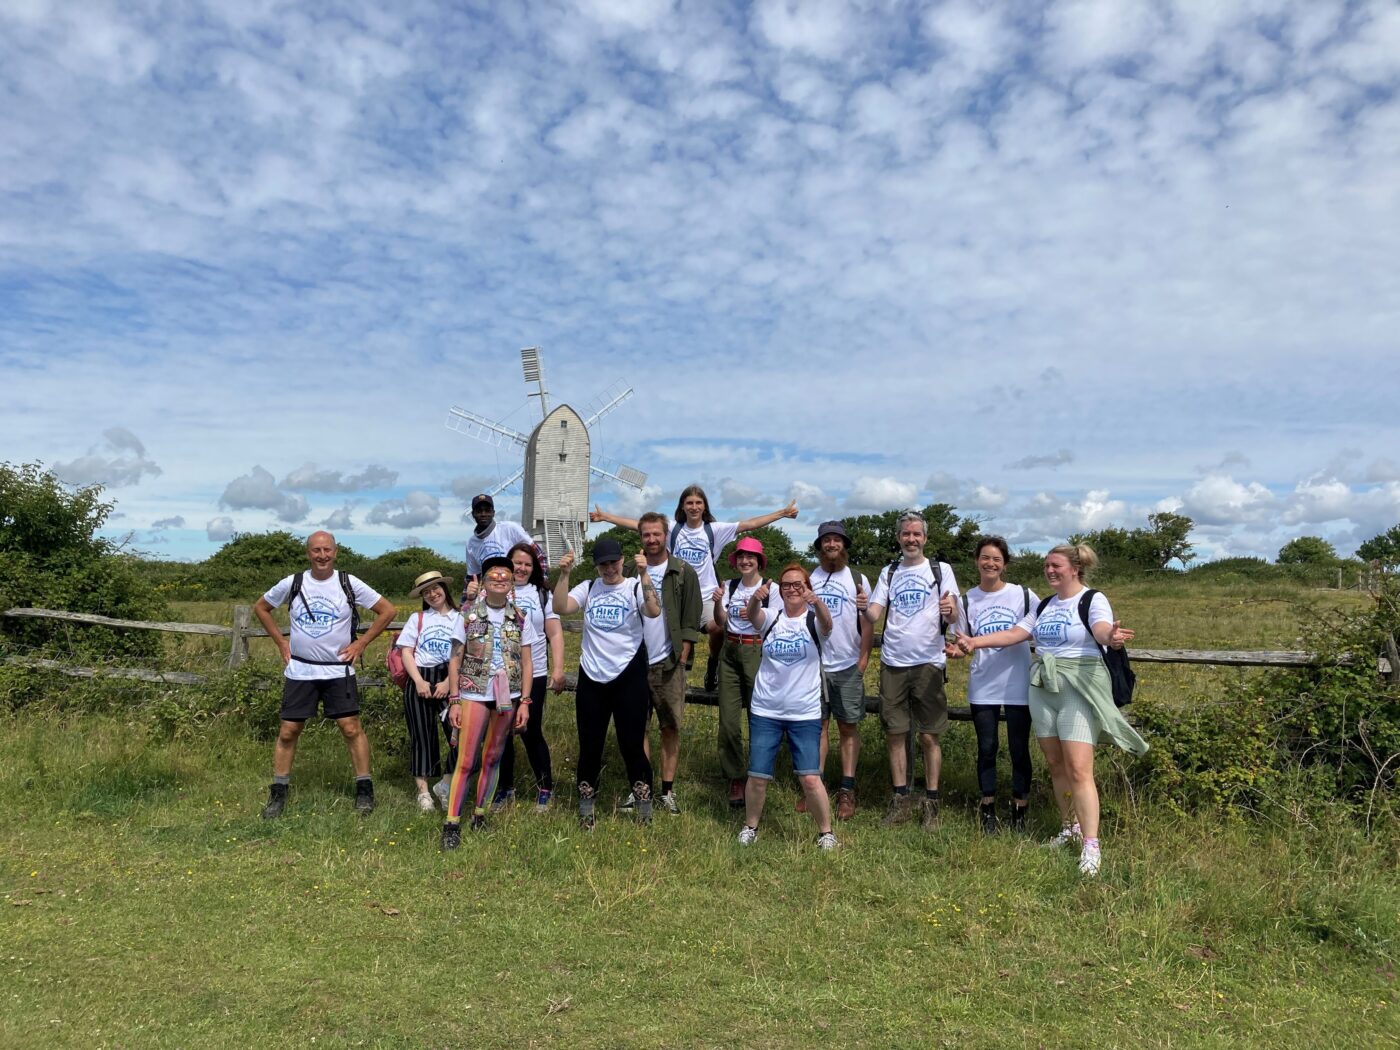 Group of hikers standing in front of a windmill in the countryside. They are all wearing Hike Against Homelessness white t-shirts.